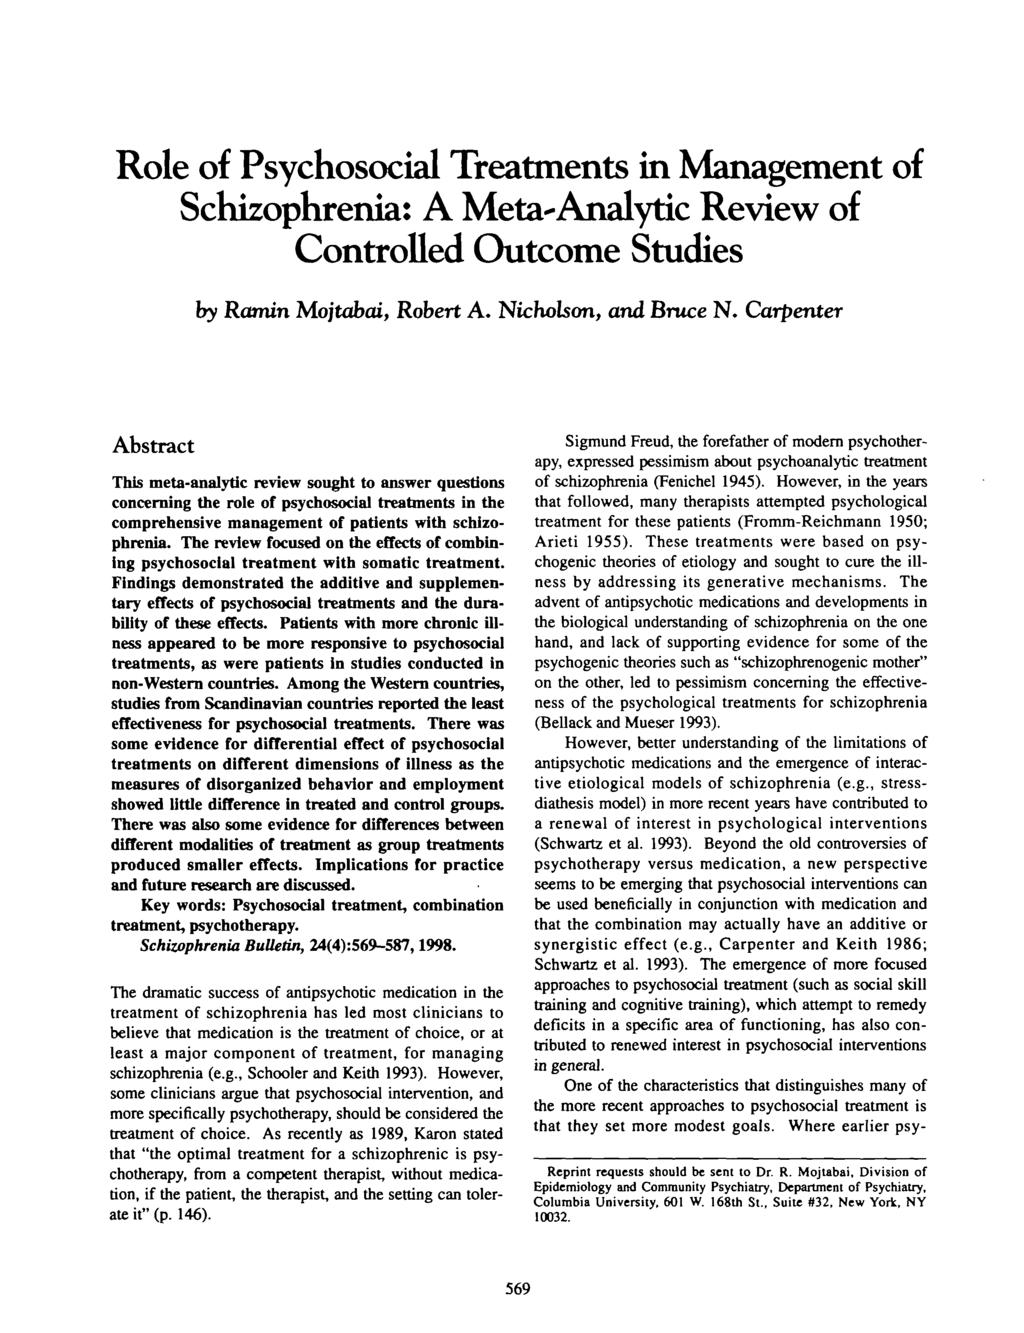 Role of Psychosocial Treatments in Management of Schizophrenia: A Meta-Analytic Review of Controlled Outcome Studies by Ramin Mojtabai, Robert A. Nicholson, and Bruce N.